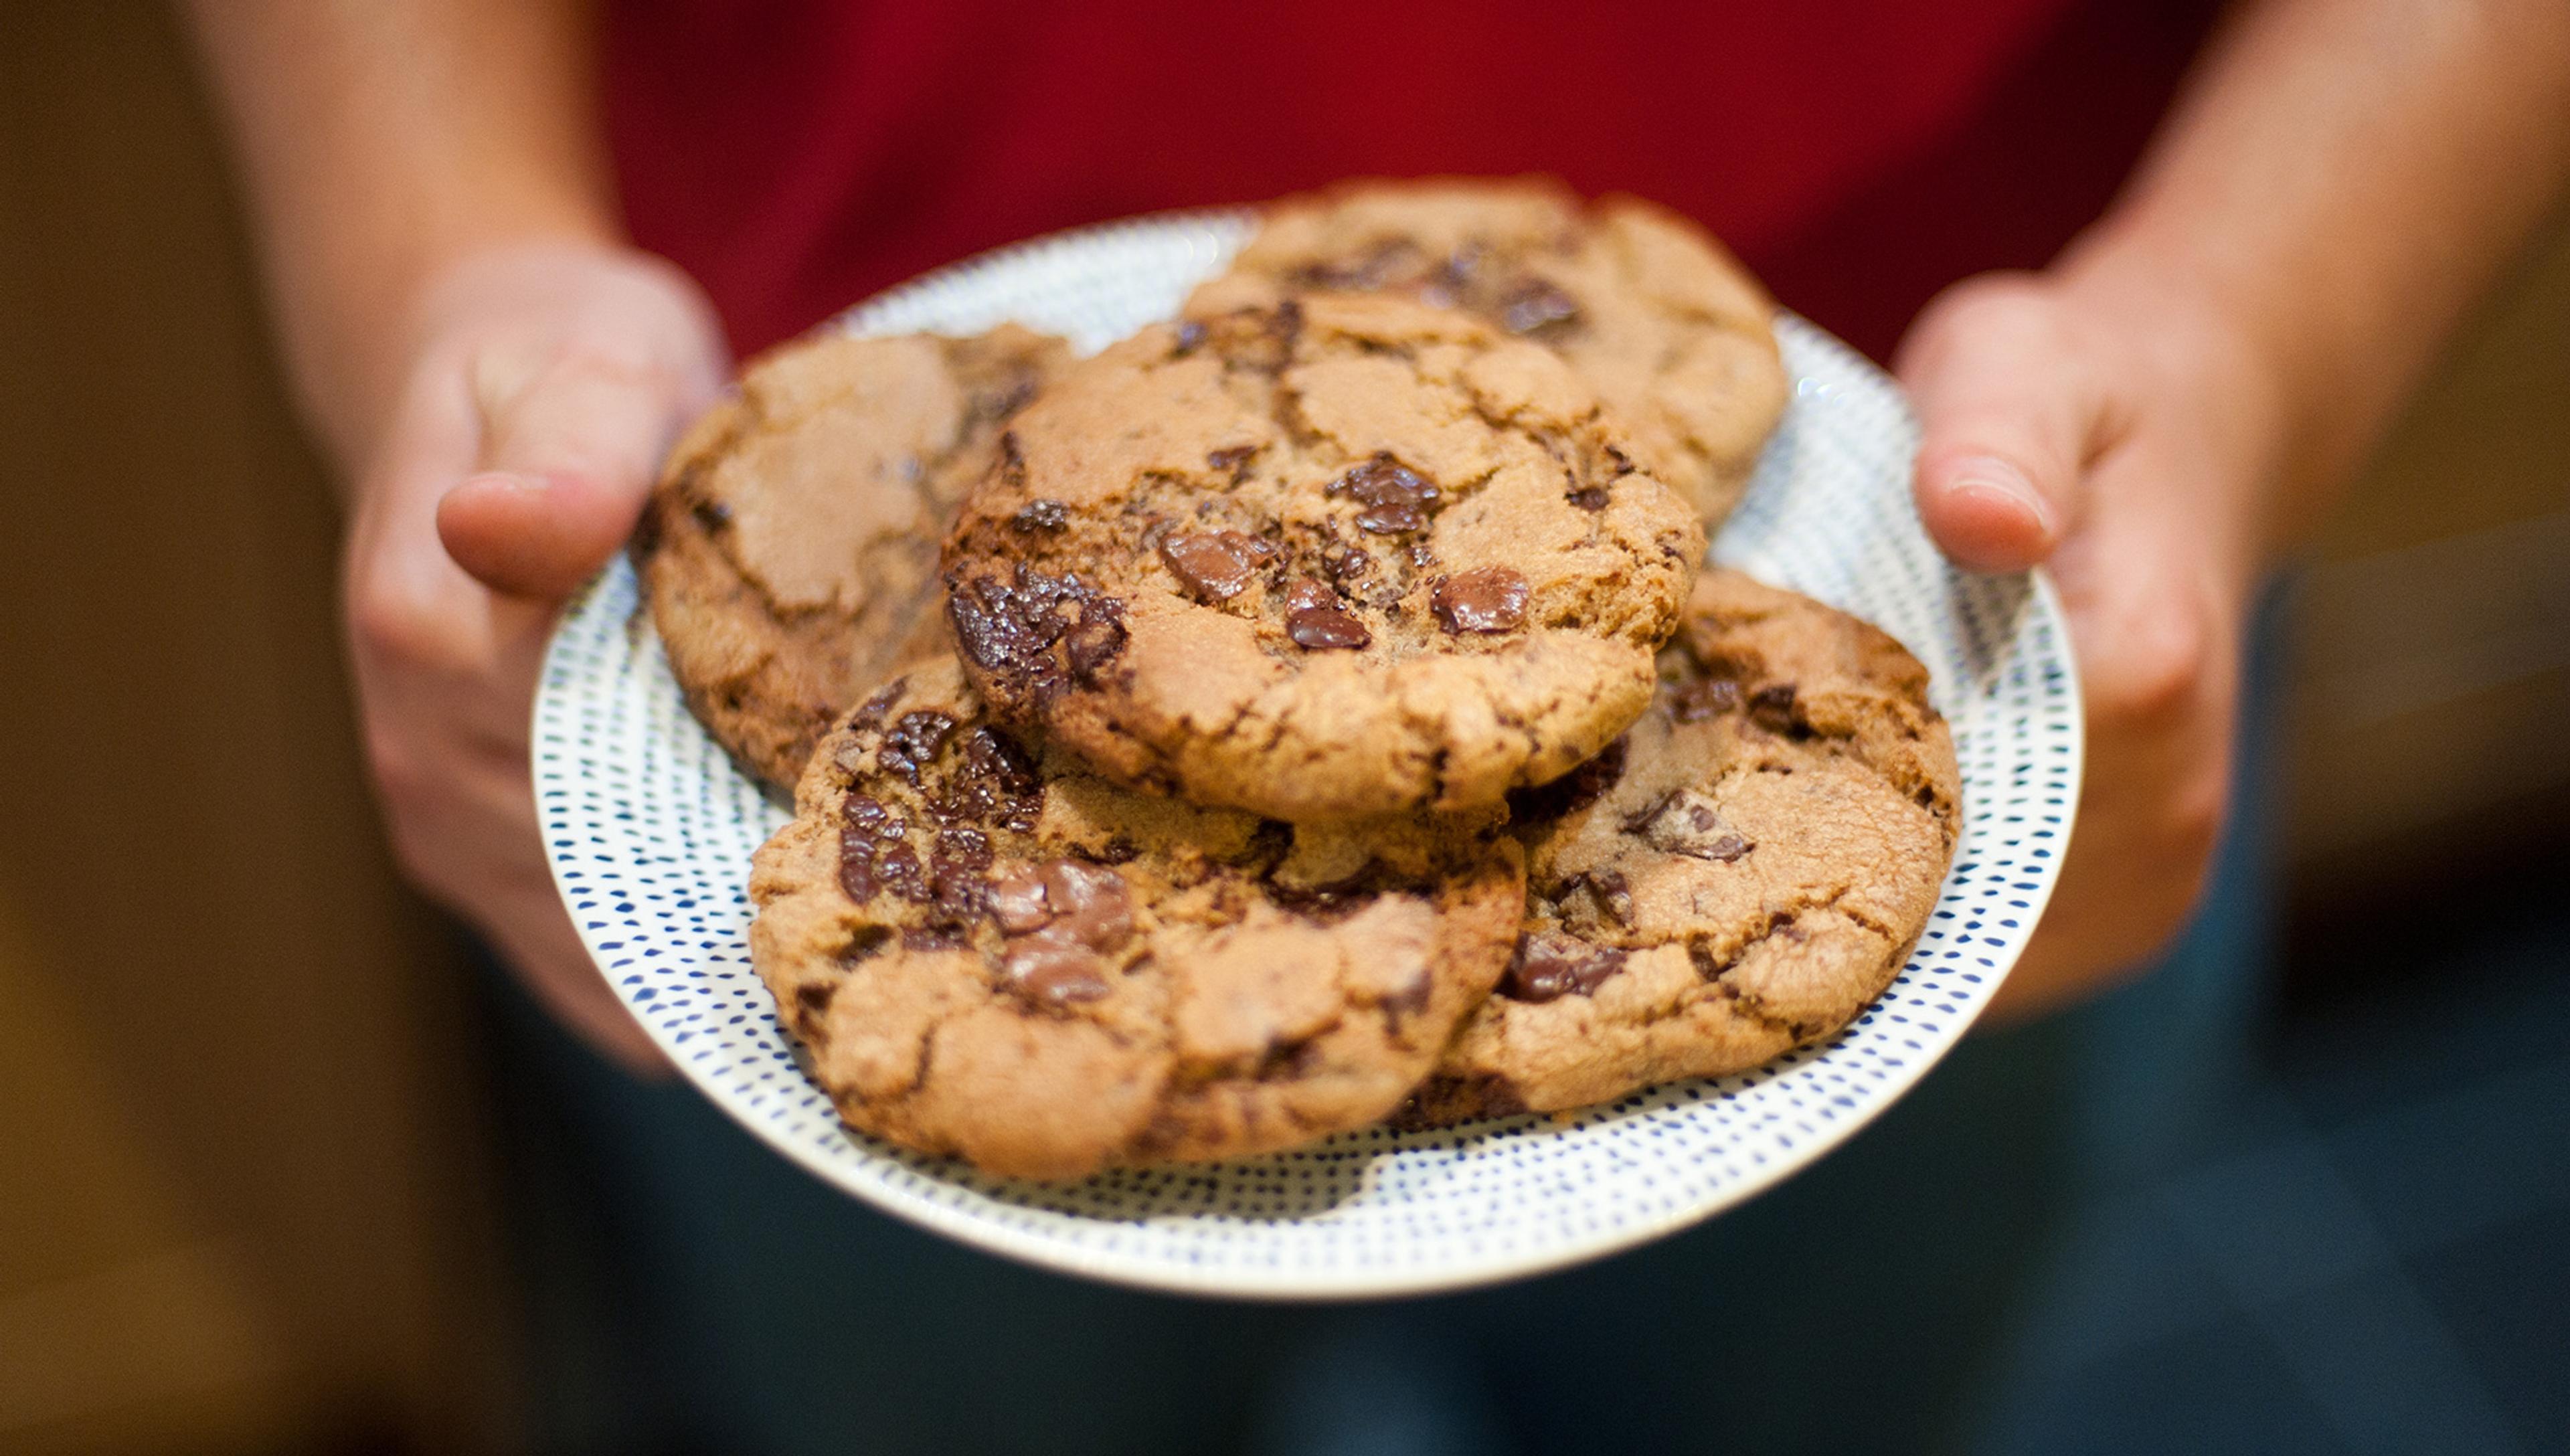 A child is offering a plate of homemade cookies